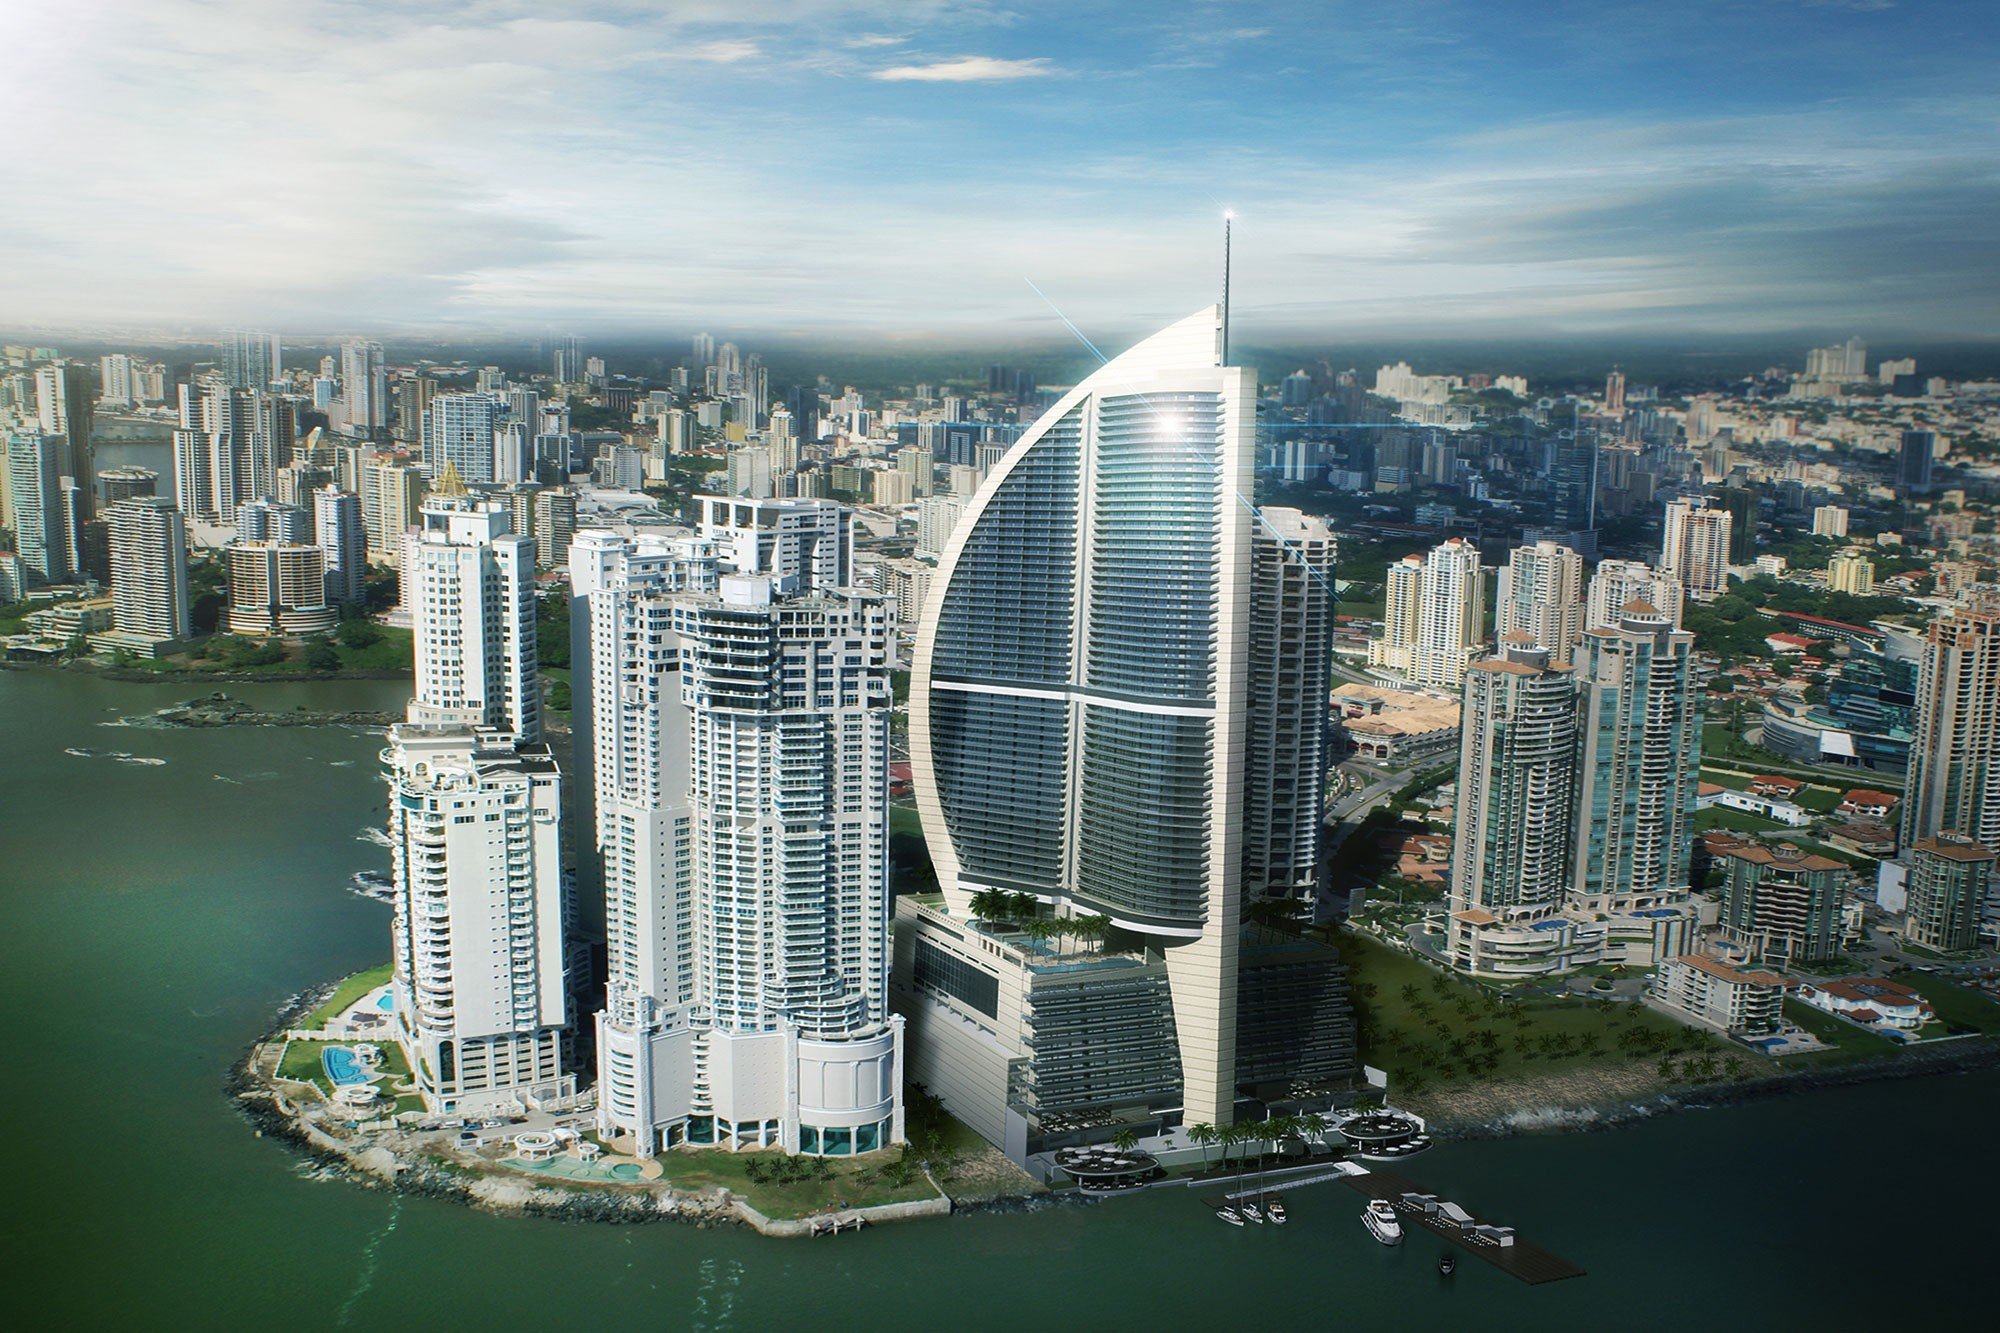 Exterior of the Trump Ocean Club International Hotel and Tower Panama